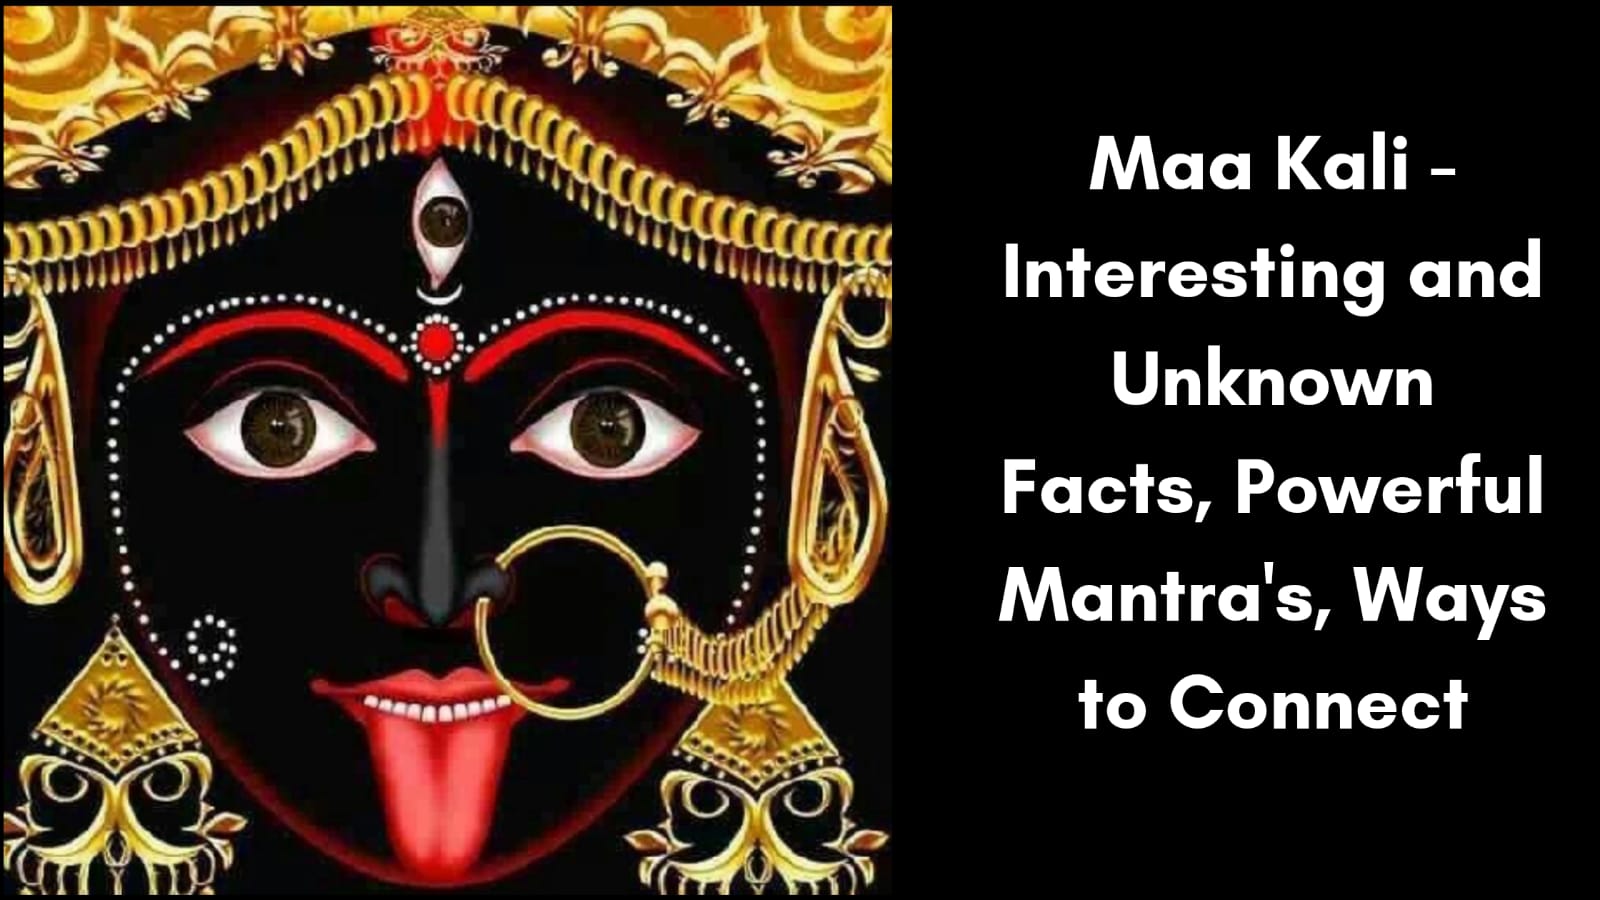 Maa Kali - Interesting and Unknown Facts, Powerful Mantra's, Ways to Connect